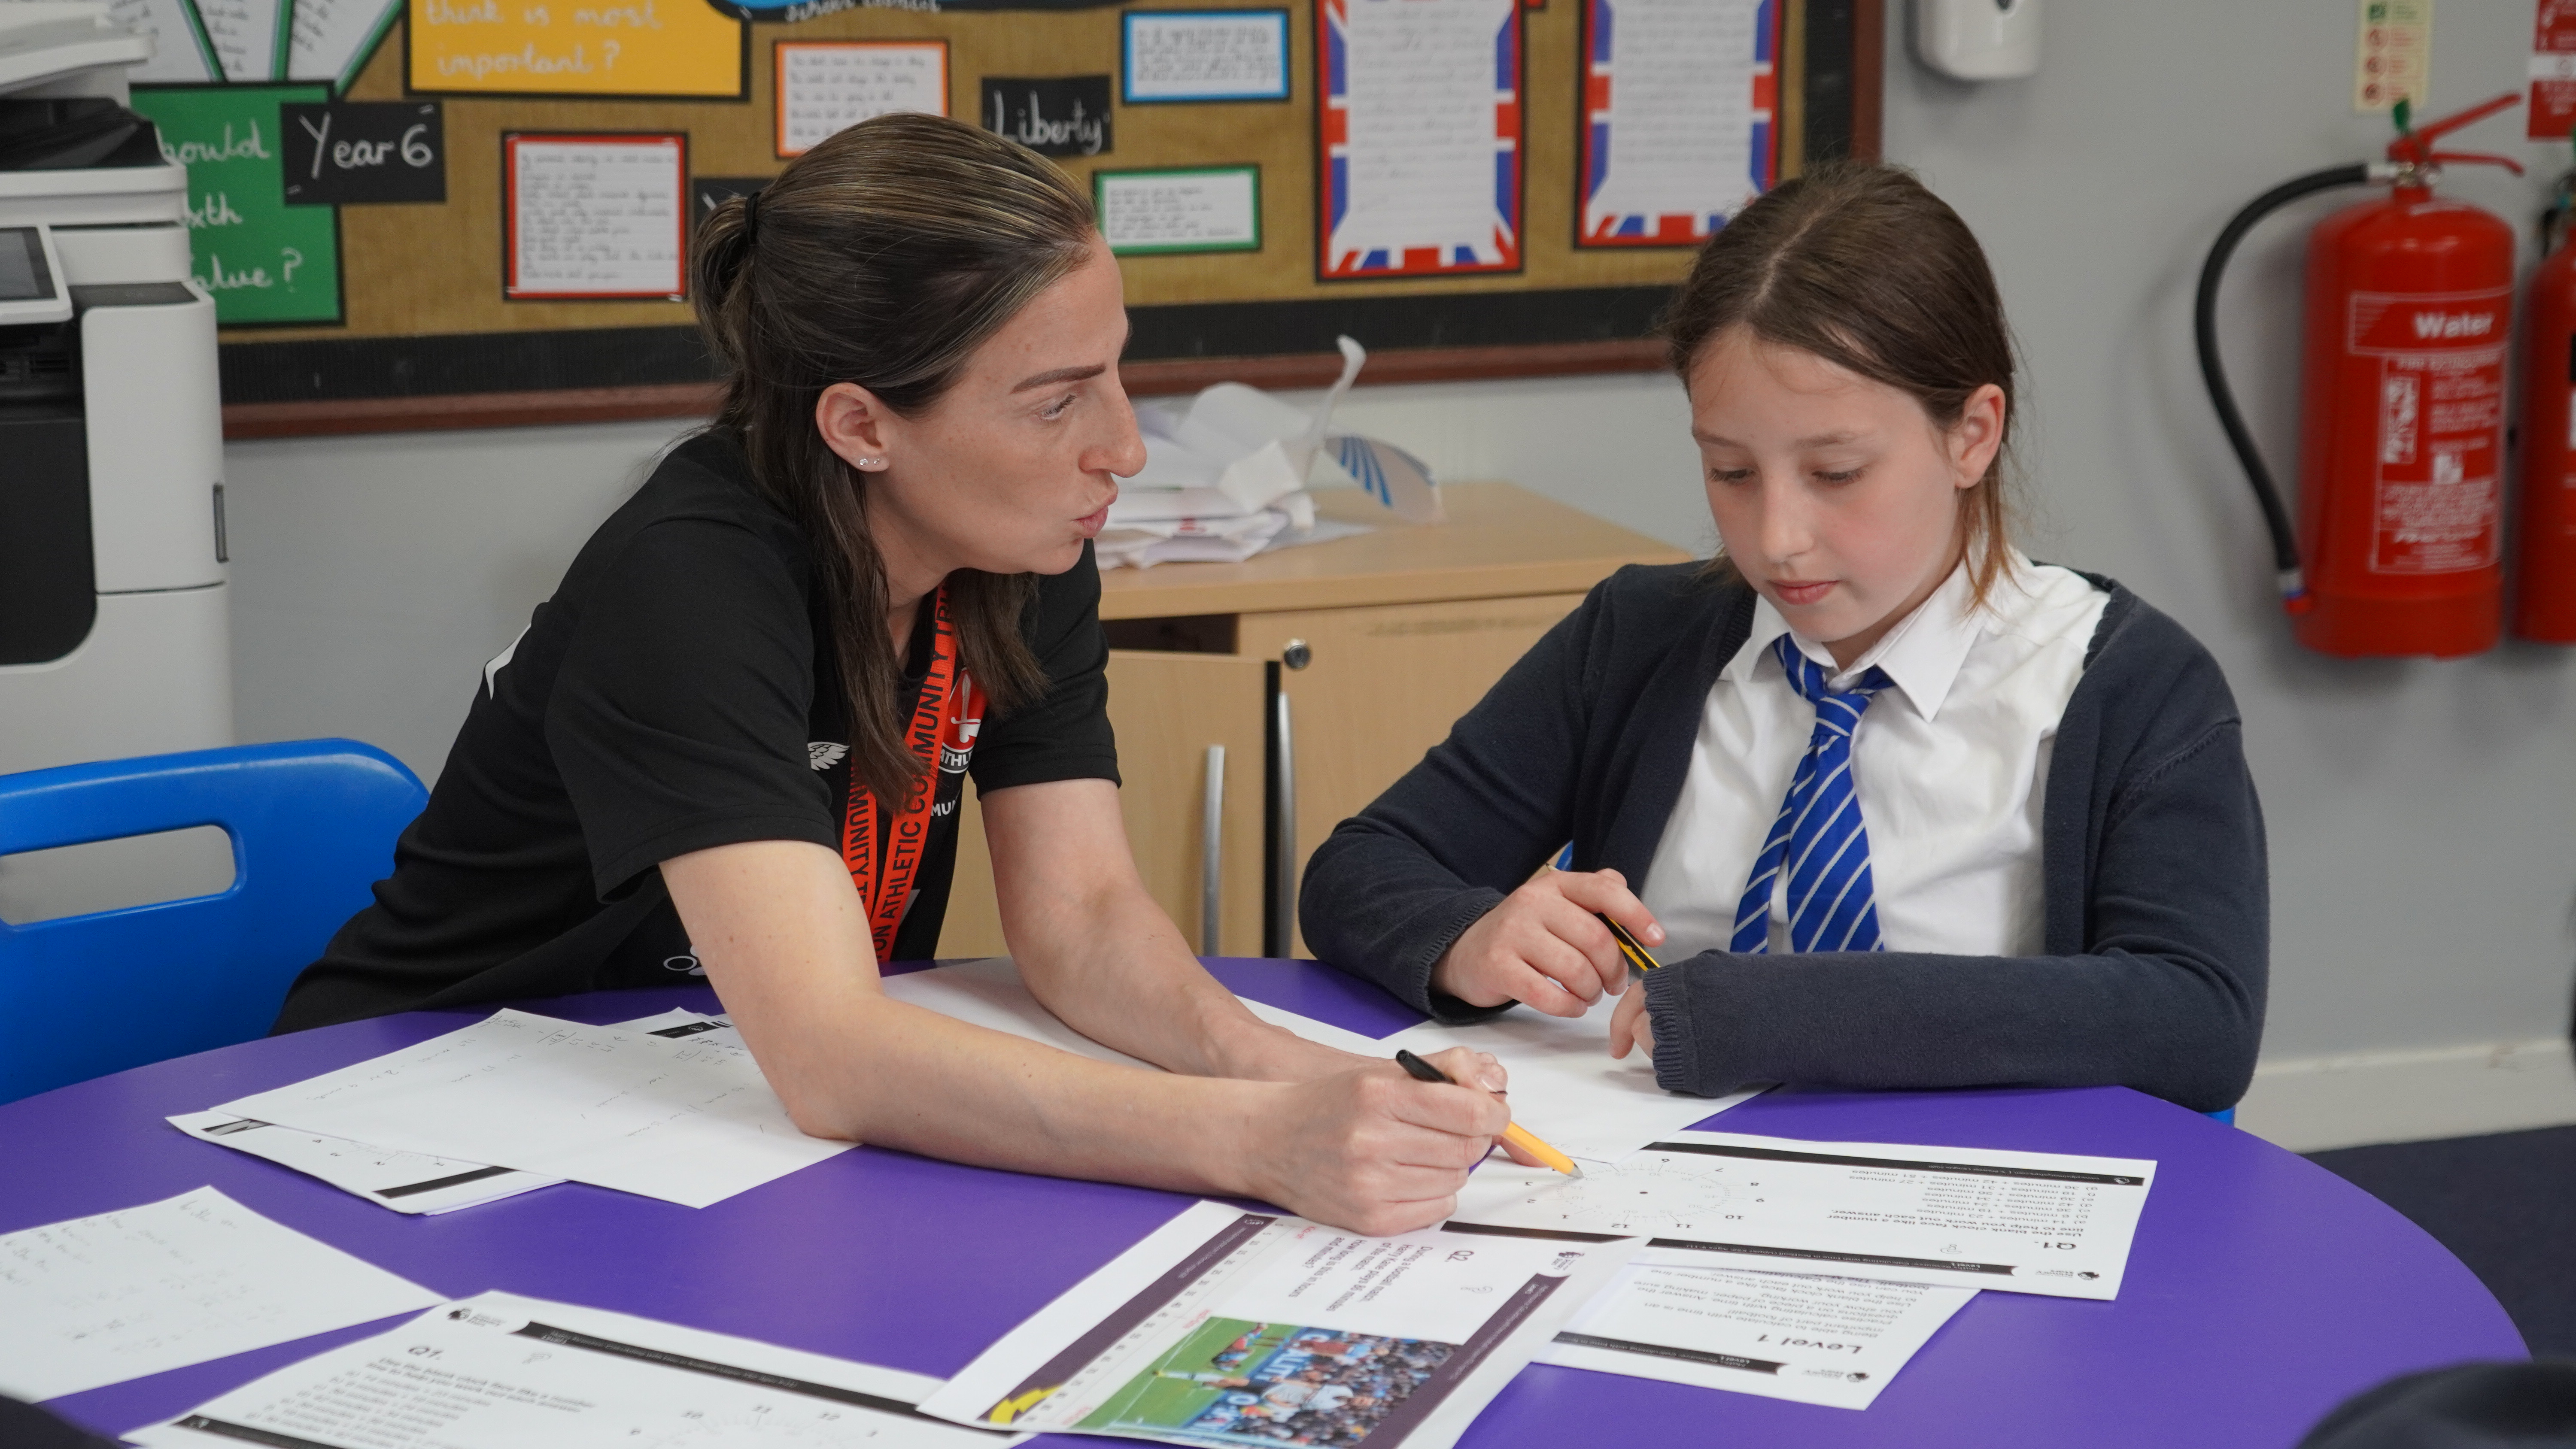 Premier League Primary Stars staff member explaining a question with a student